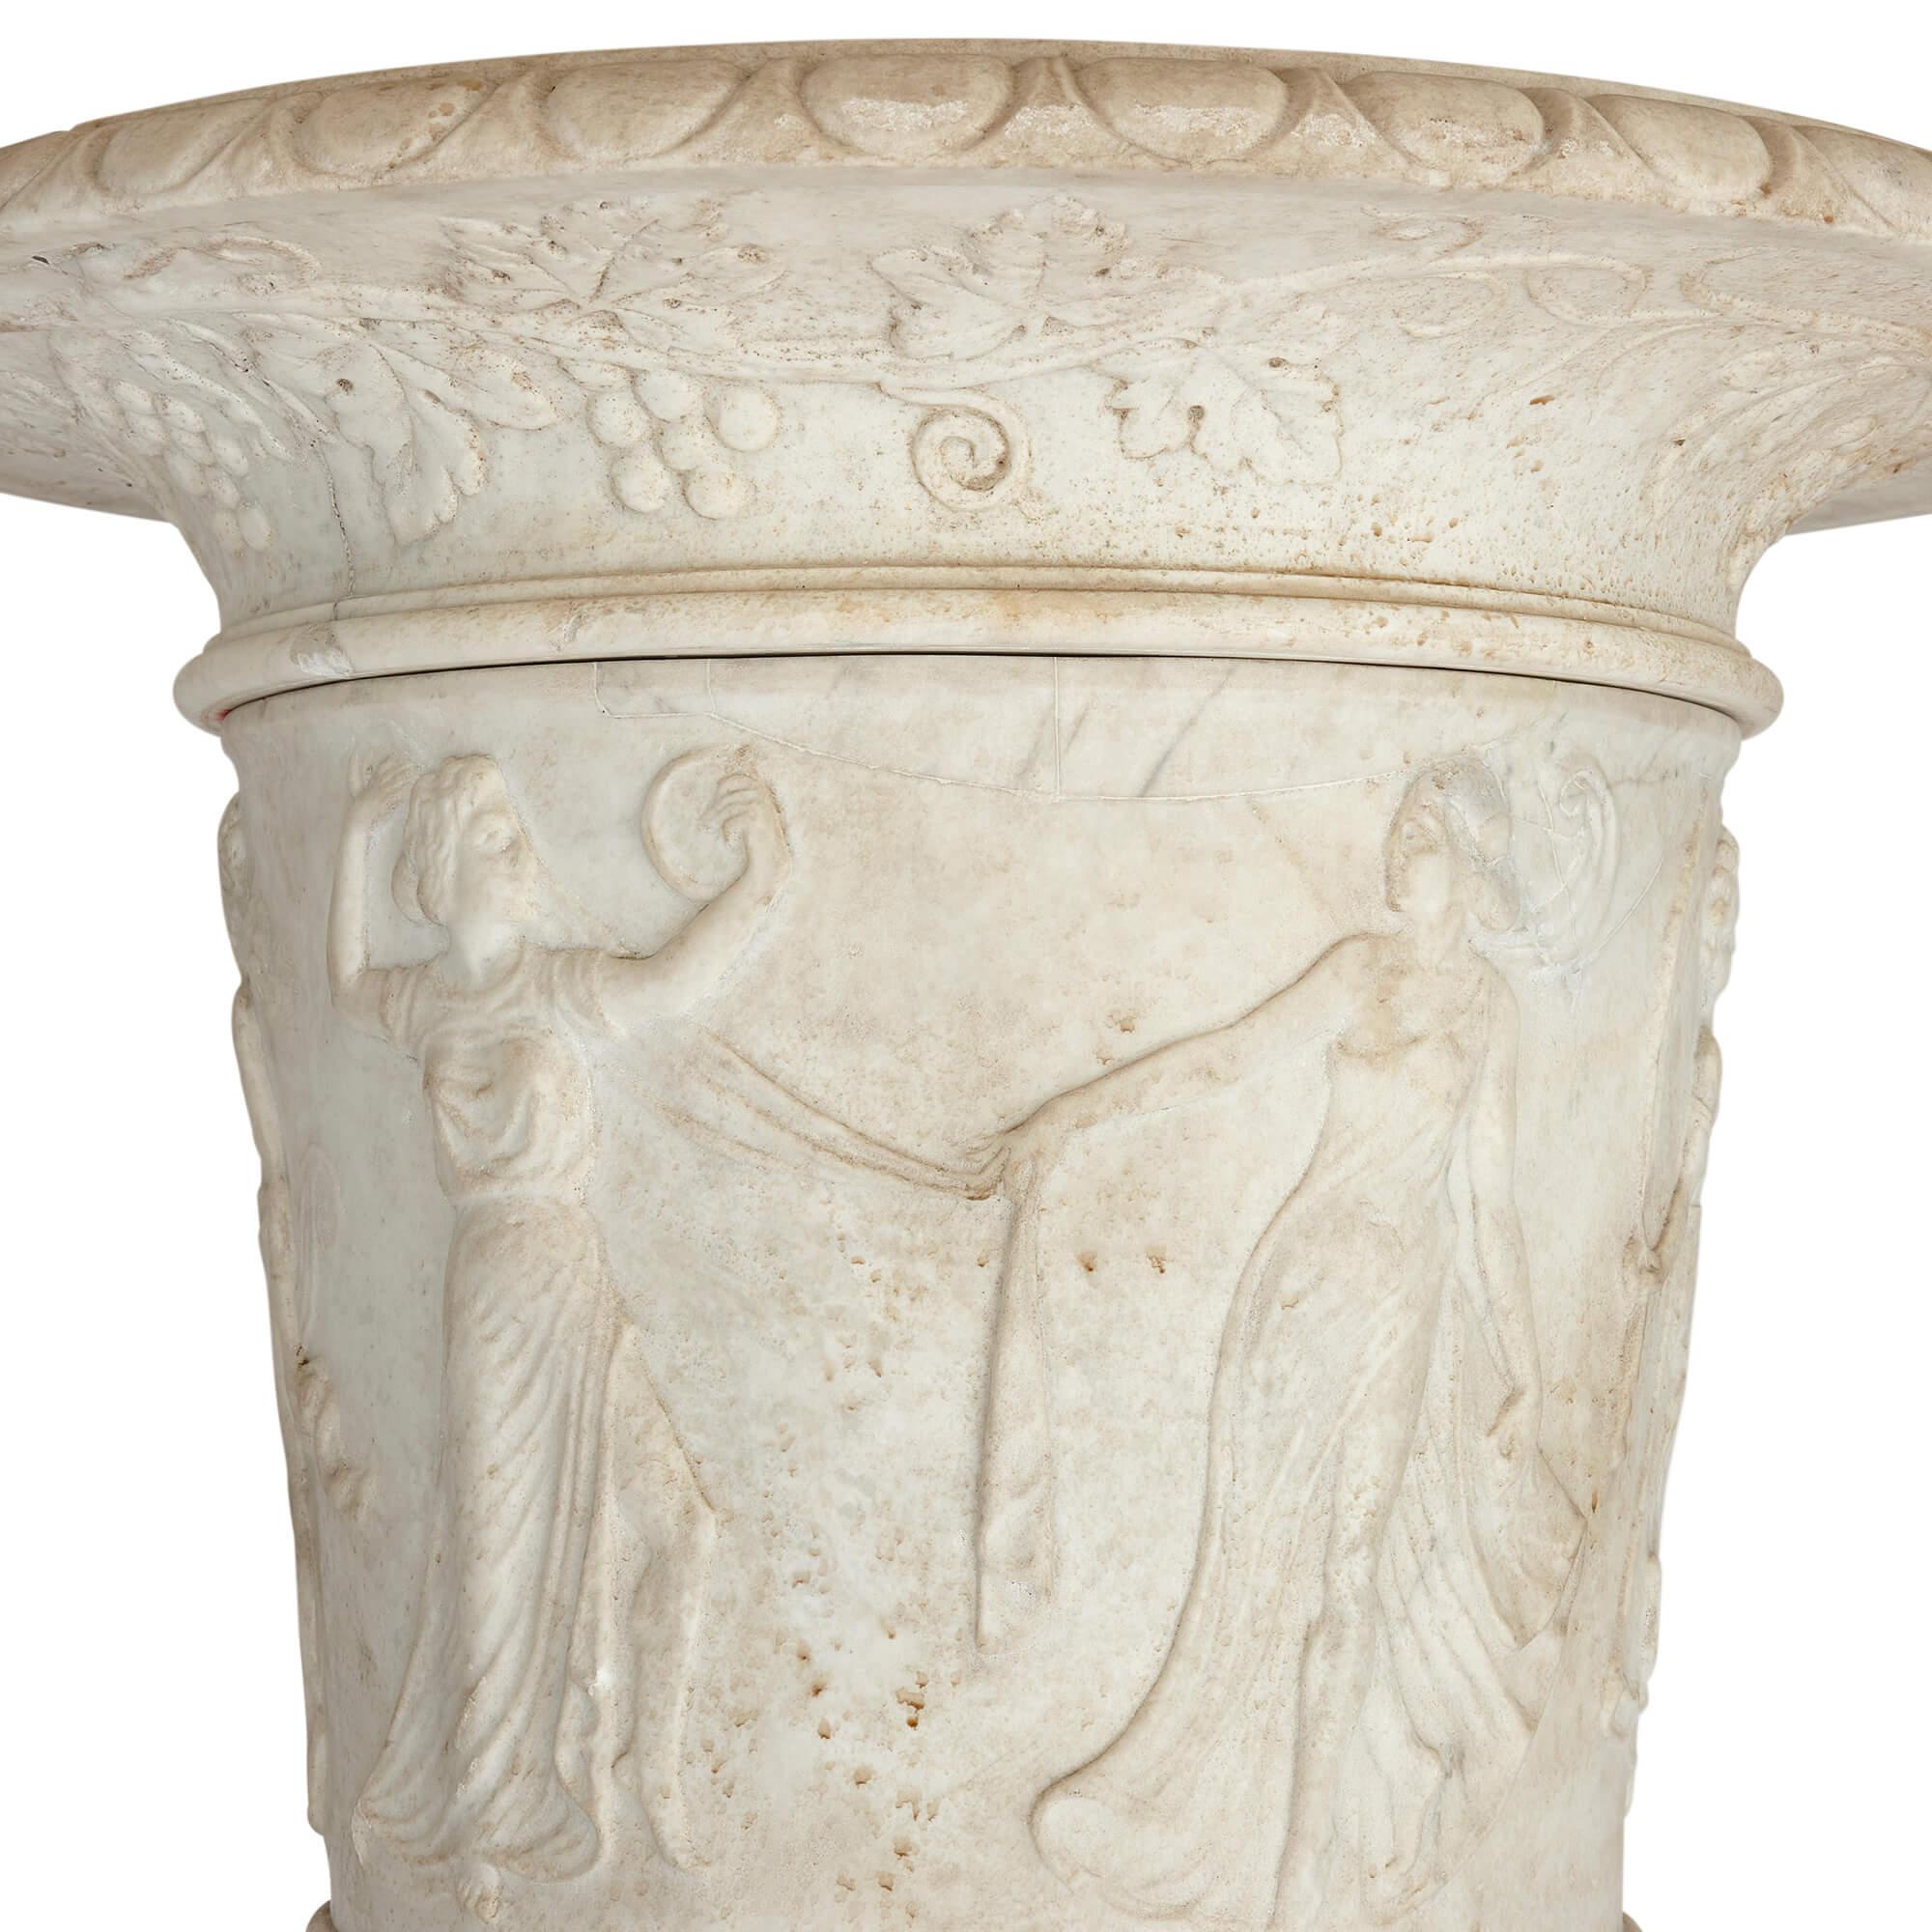 Pair of Large, Very Fine Carved Marble Garden Urns of Campana Form with Plinths In Fair Condition For Sale In London, GB